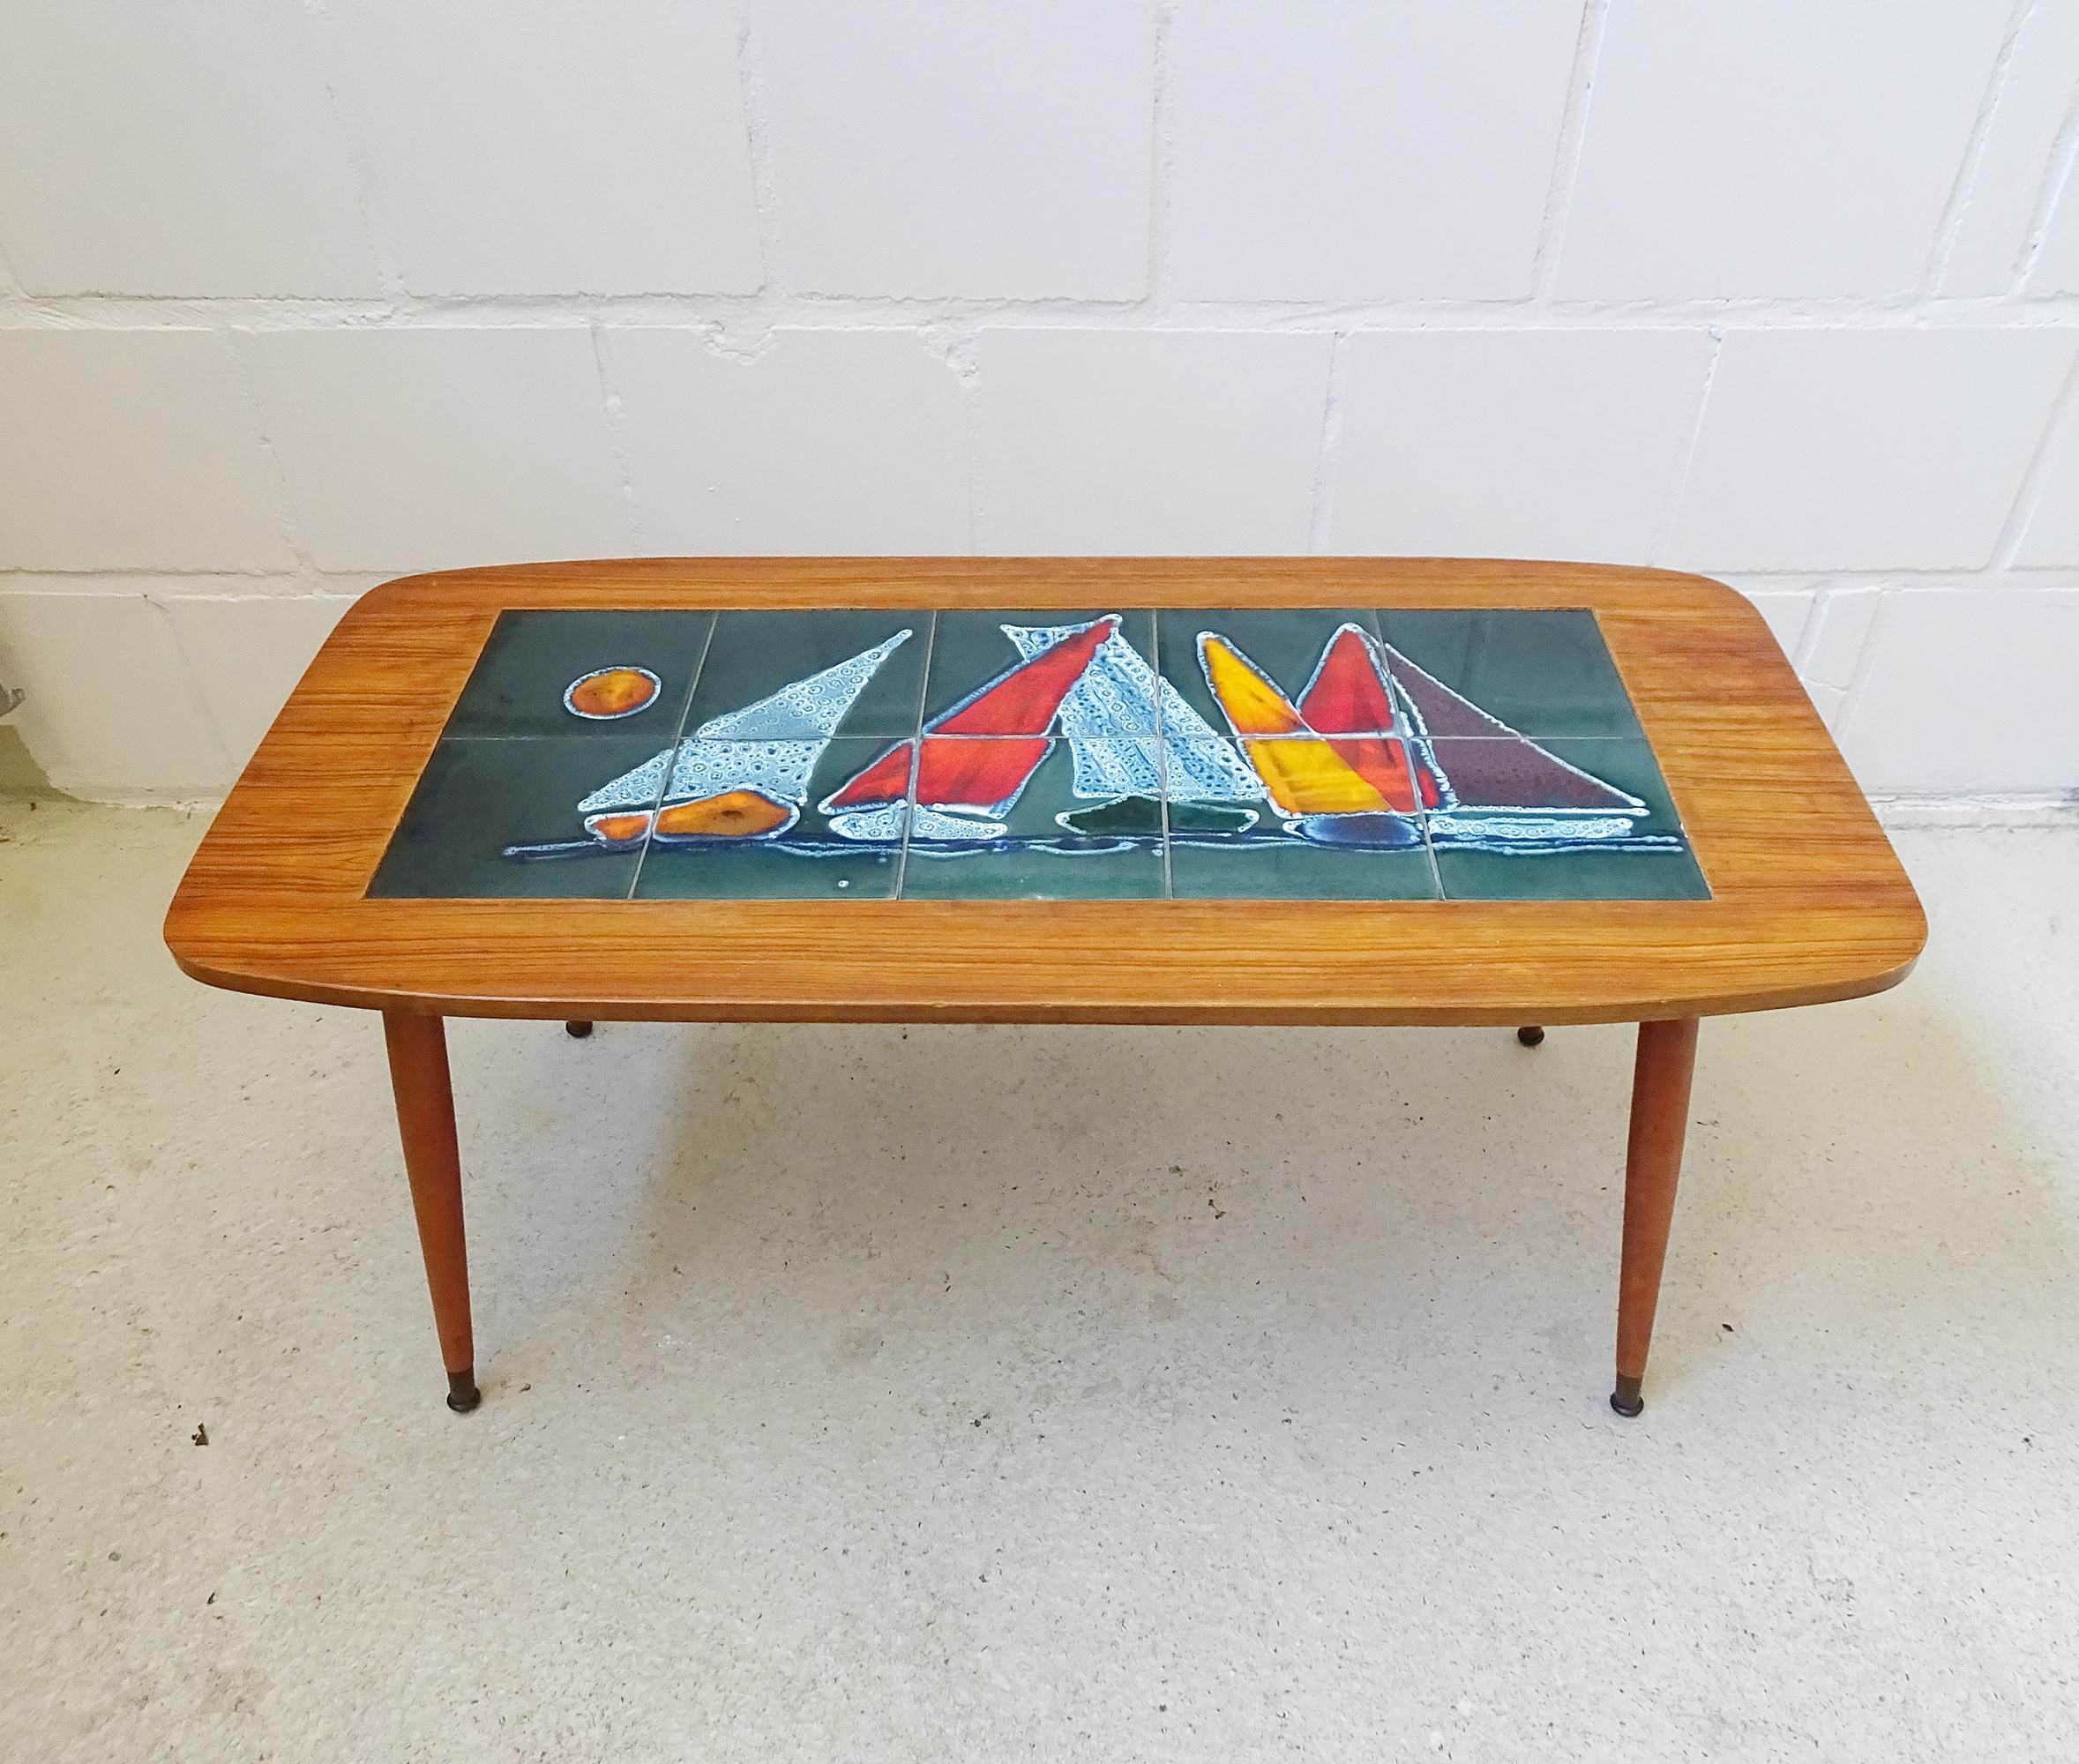 This rectangular table is a stylish coffee table from the 1950s/1960s. The living room table is equipped with a veneered walnut table top and a large tile picture with sailing boats. Artfully designed ceramic tiles in dark green and colorfully